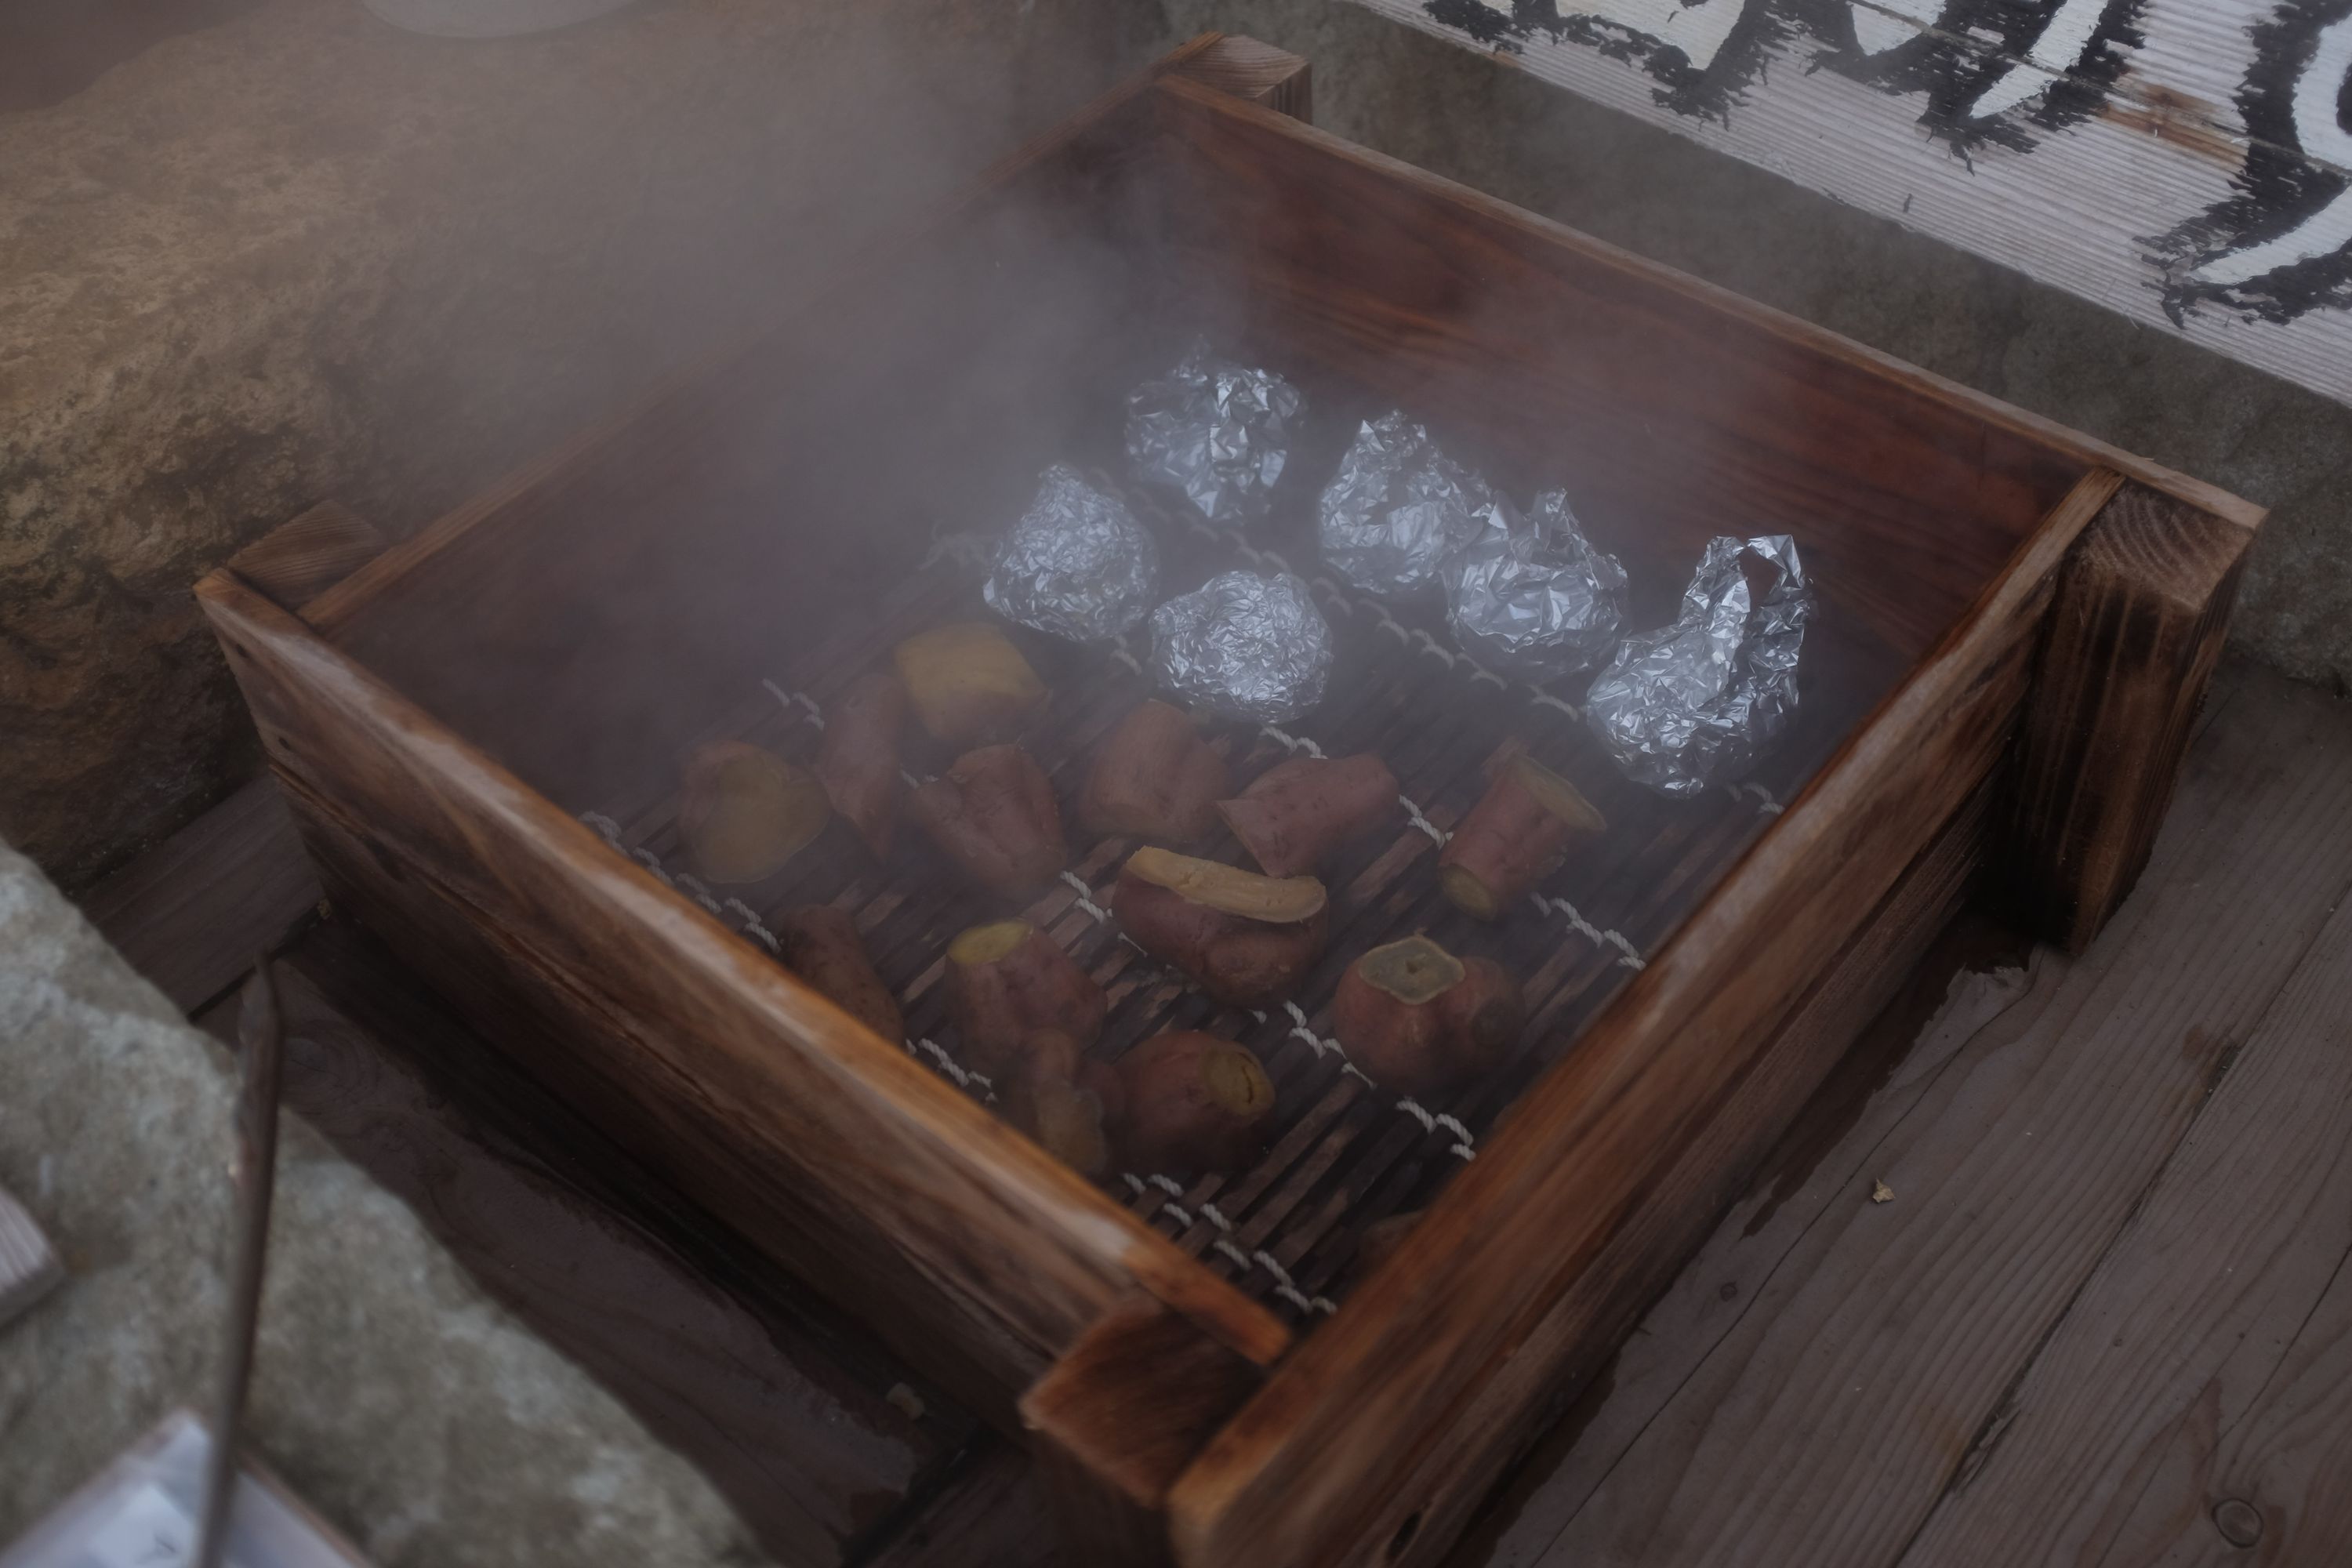 Sweet potatoes and onions being steamed in a wooden crate at a hot spring.